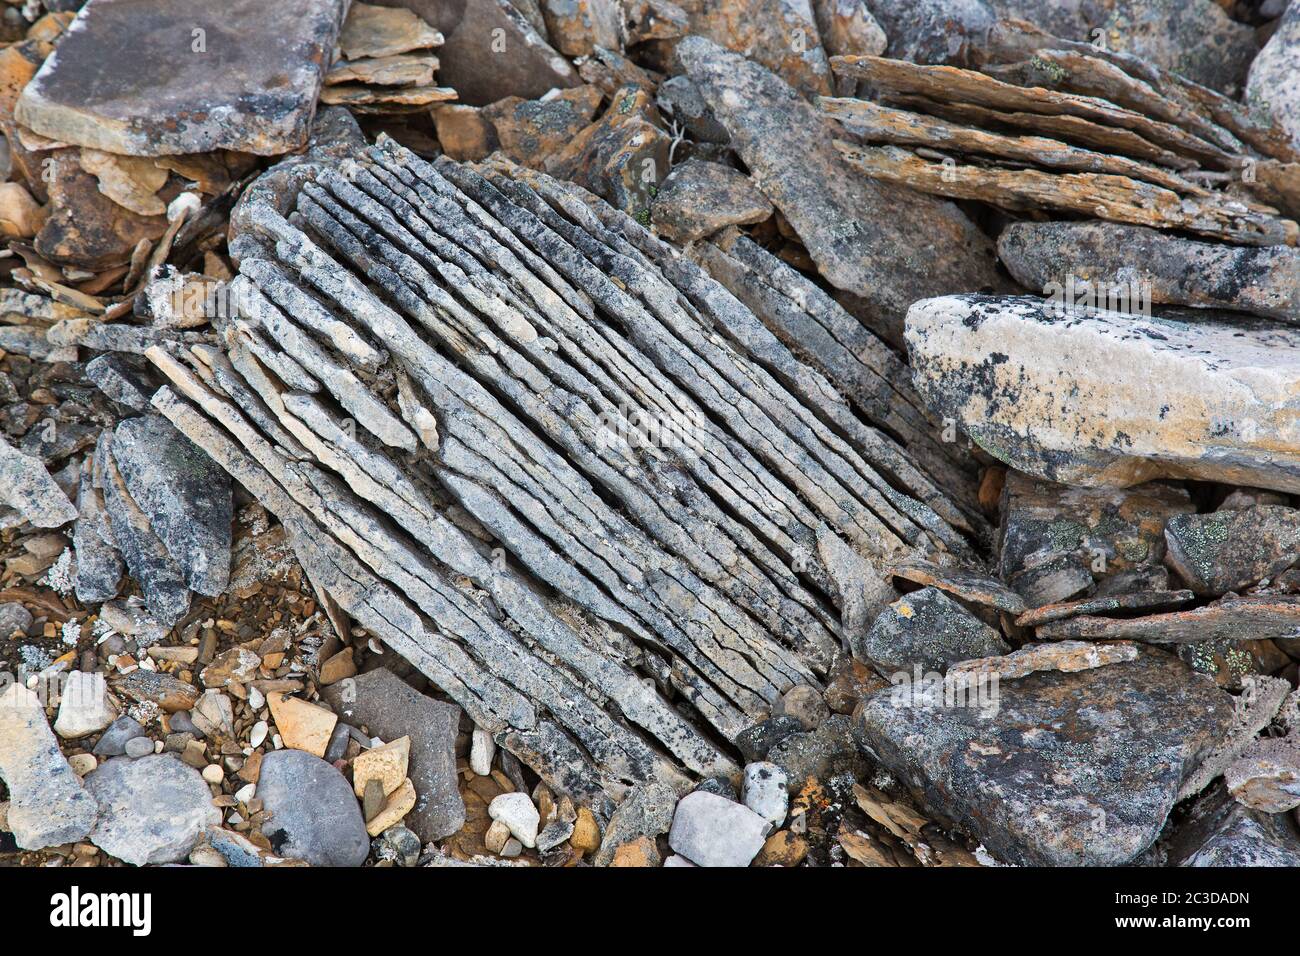 Close-up of shattered sedimentary rock, slate / shale fractured along existing joints by frost weathering on Svalbard / Spitsbergen, Norway Stock Photo